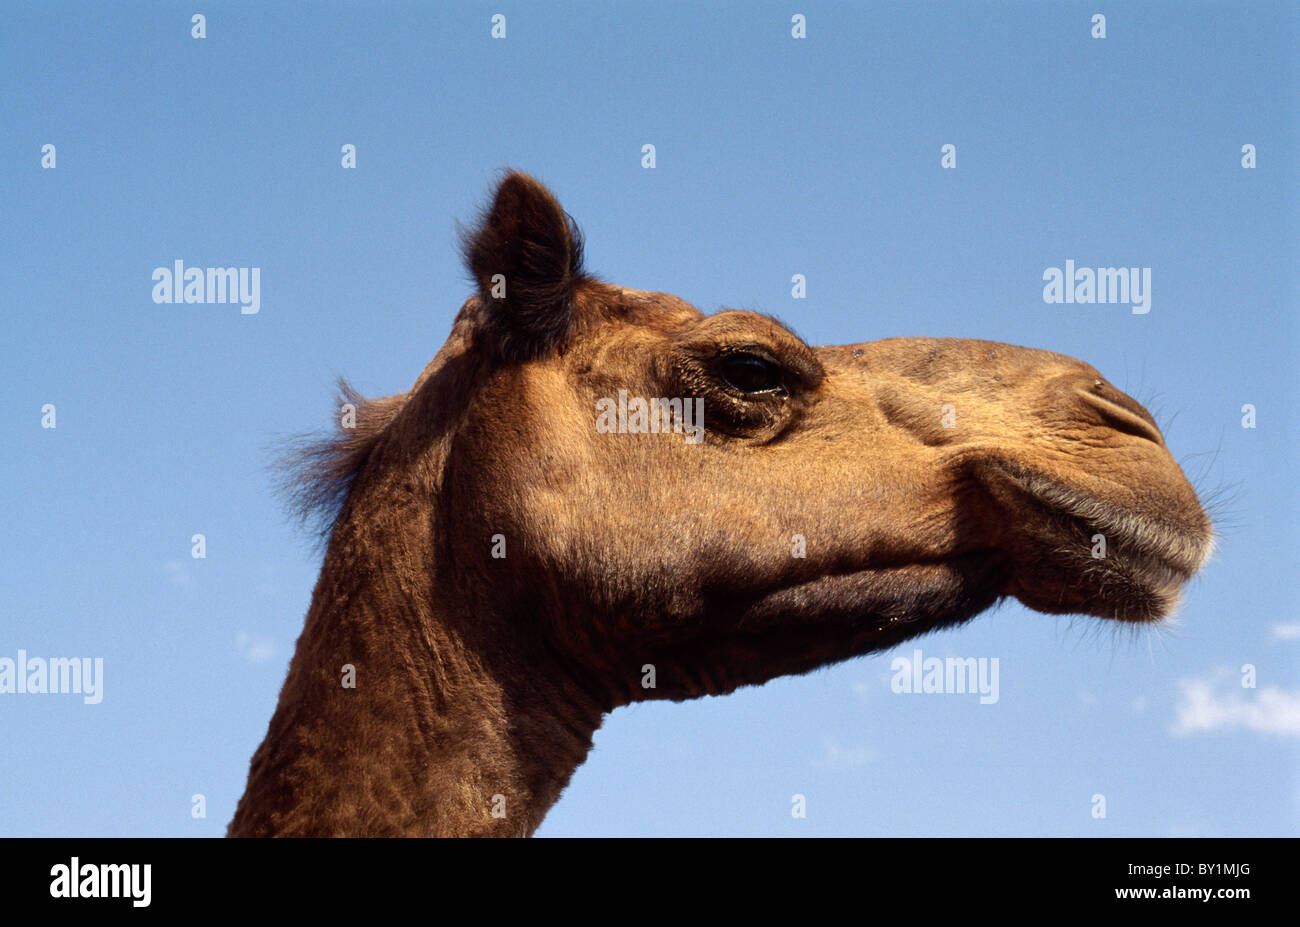 Camel in Rajasthan, India Stock Photo